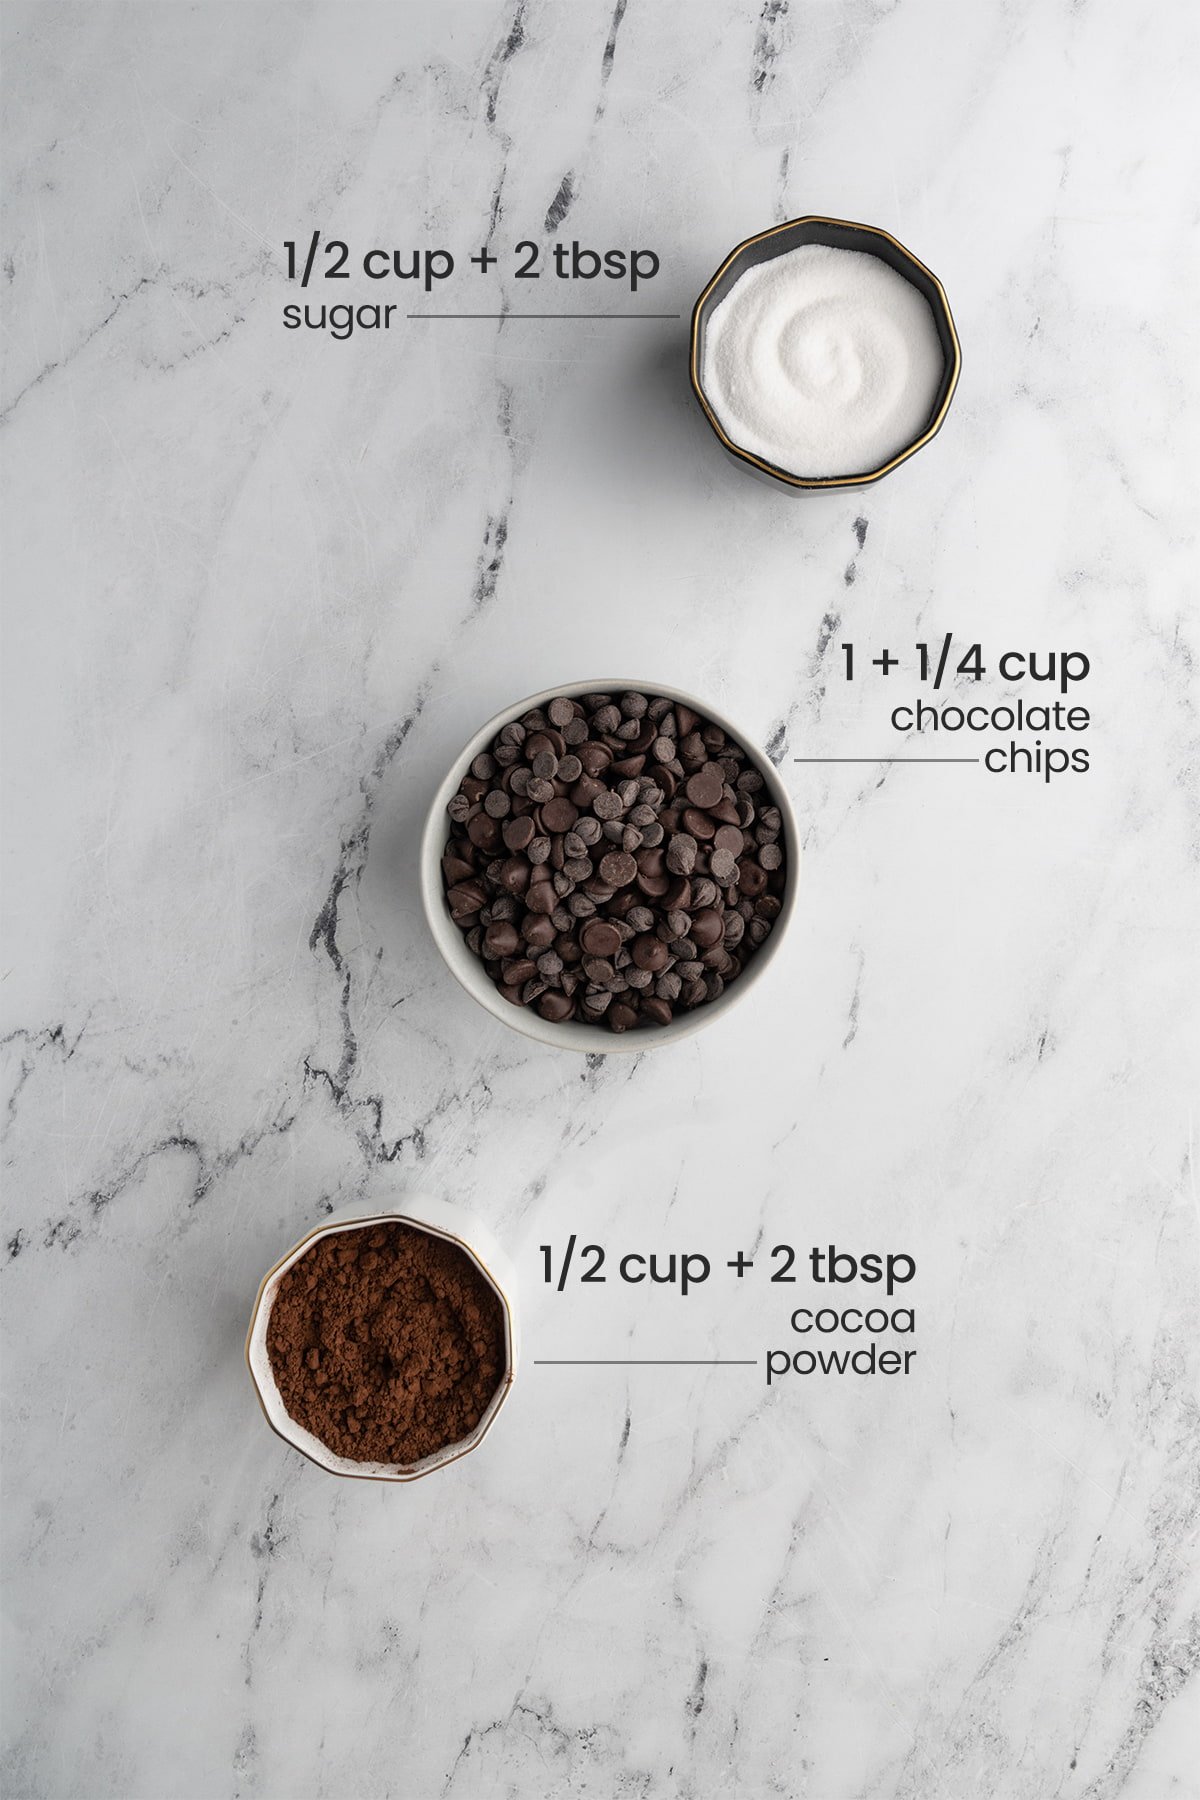 ingredients for hot chocolate mix - sugar, chocolate chips and cocoa powder